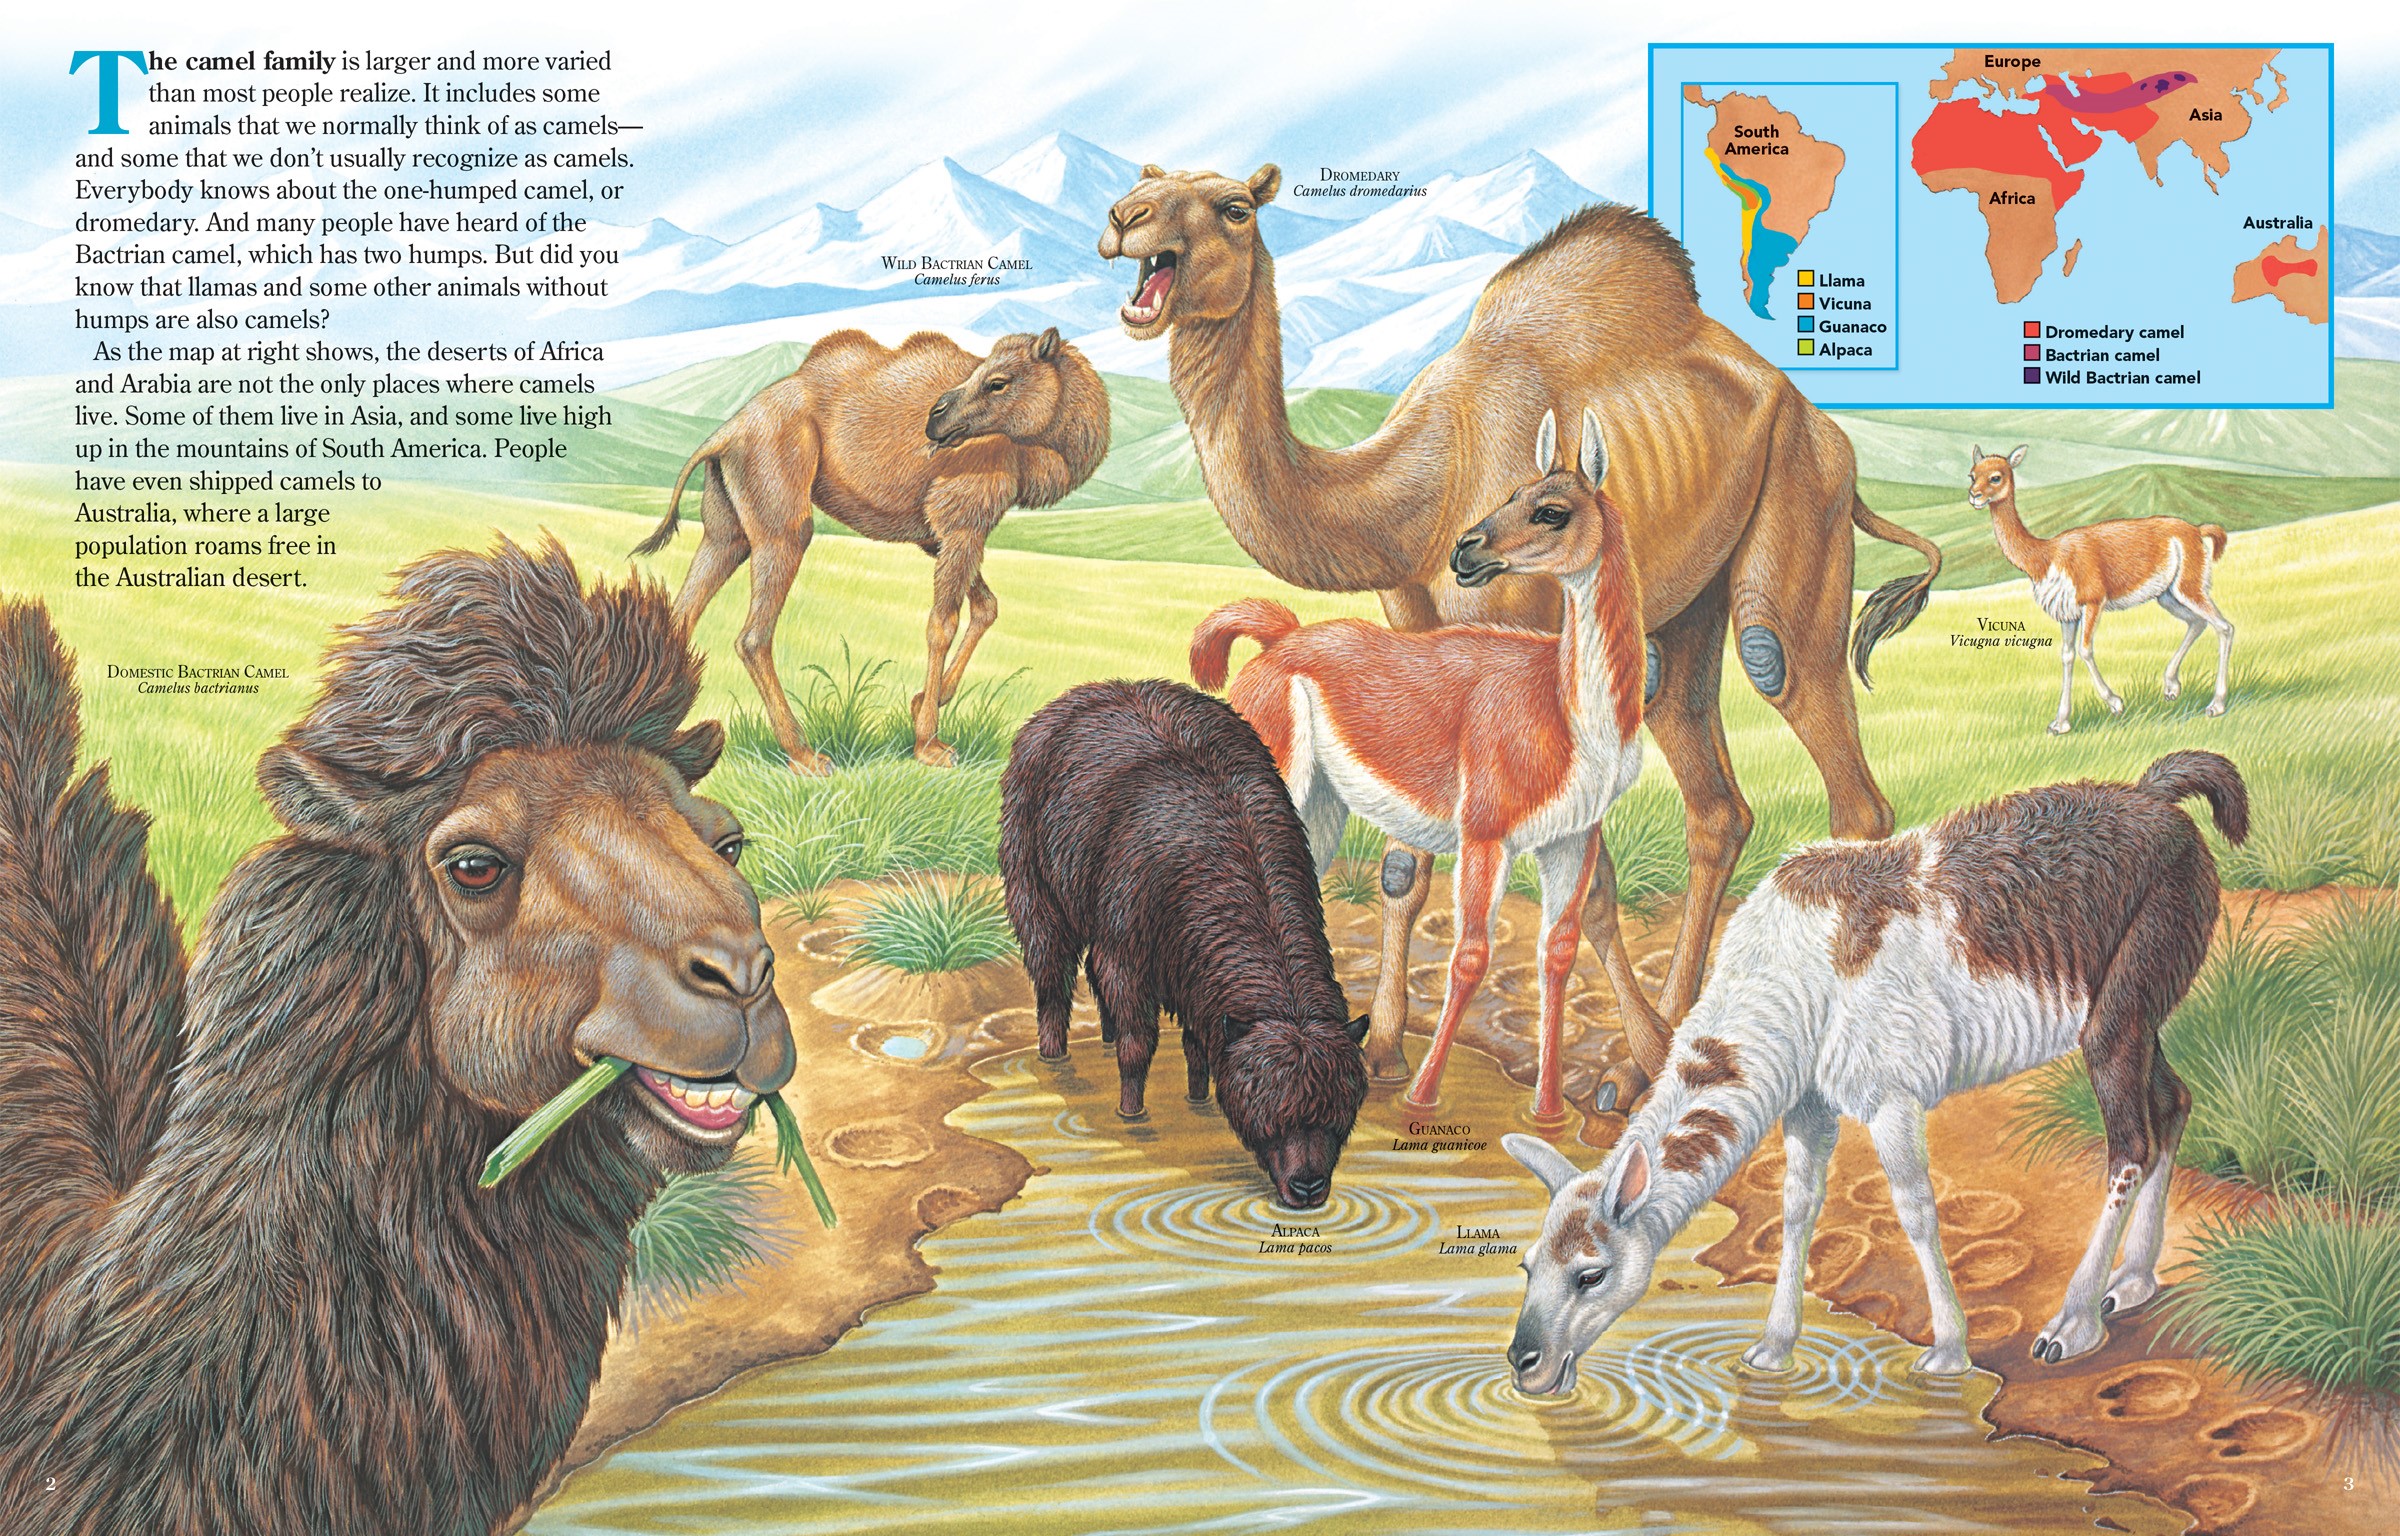 Pages 2&3 from Zoobooks Camels showing the 7 different types of camels and a range map.